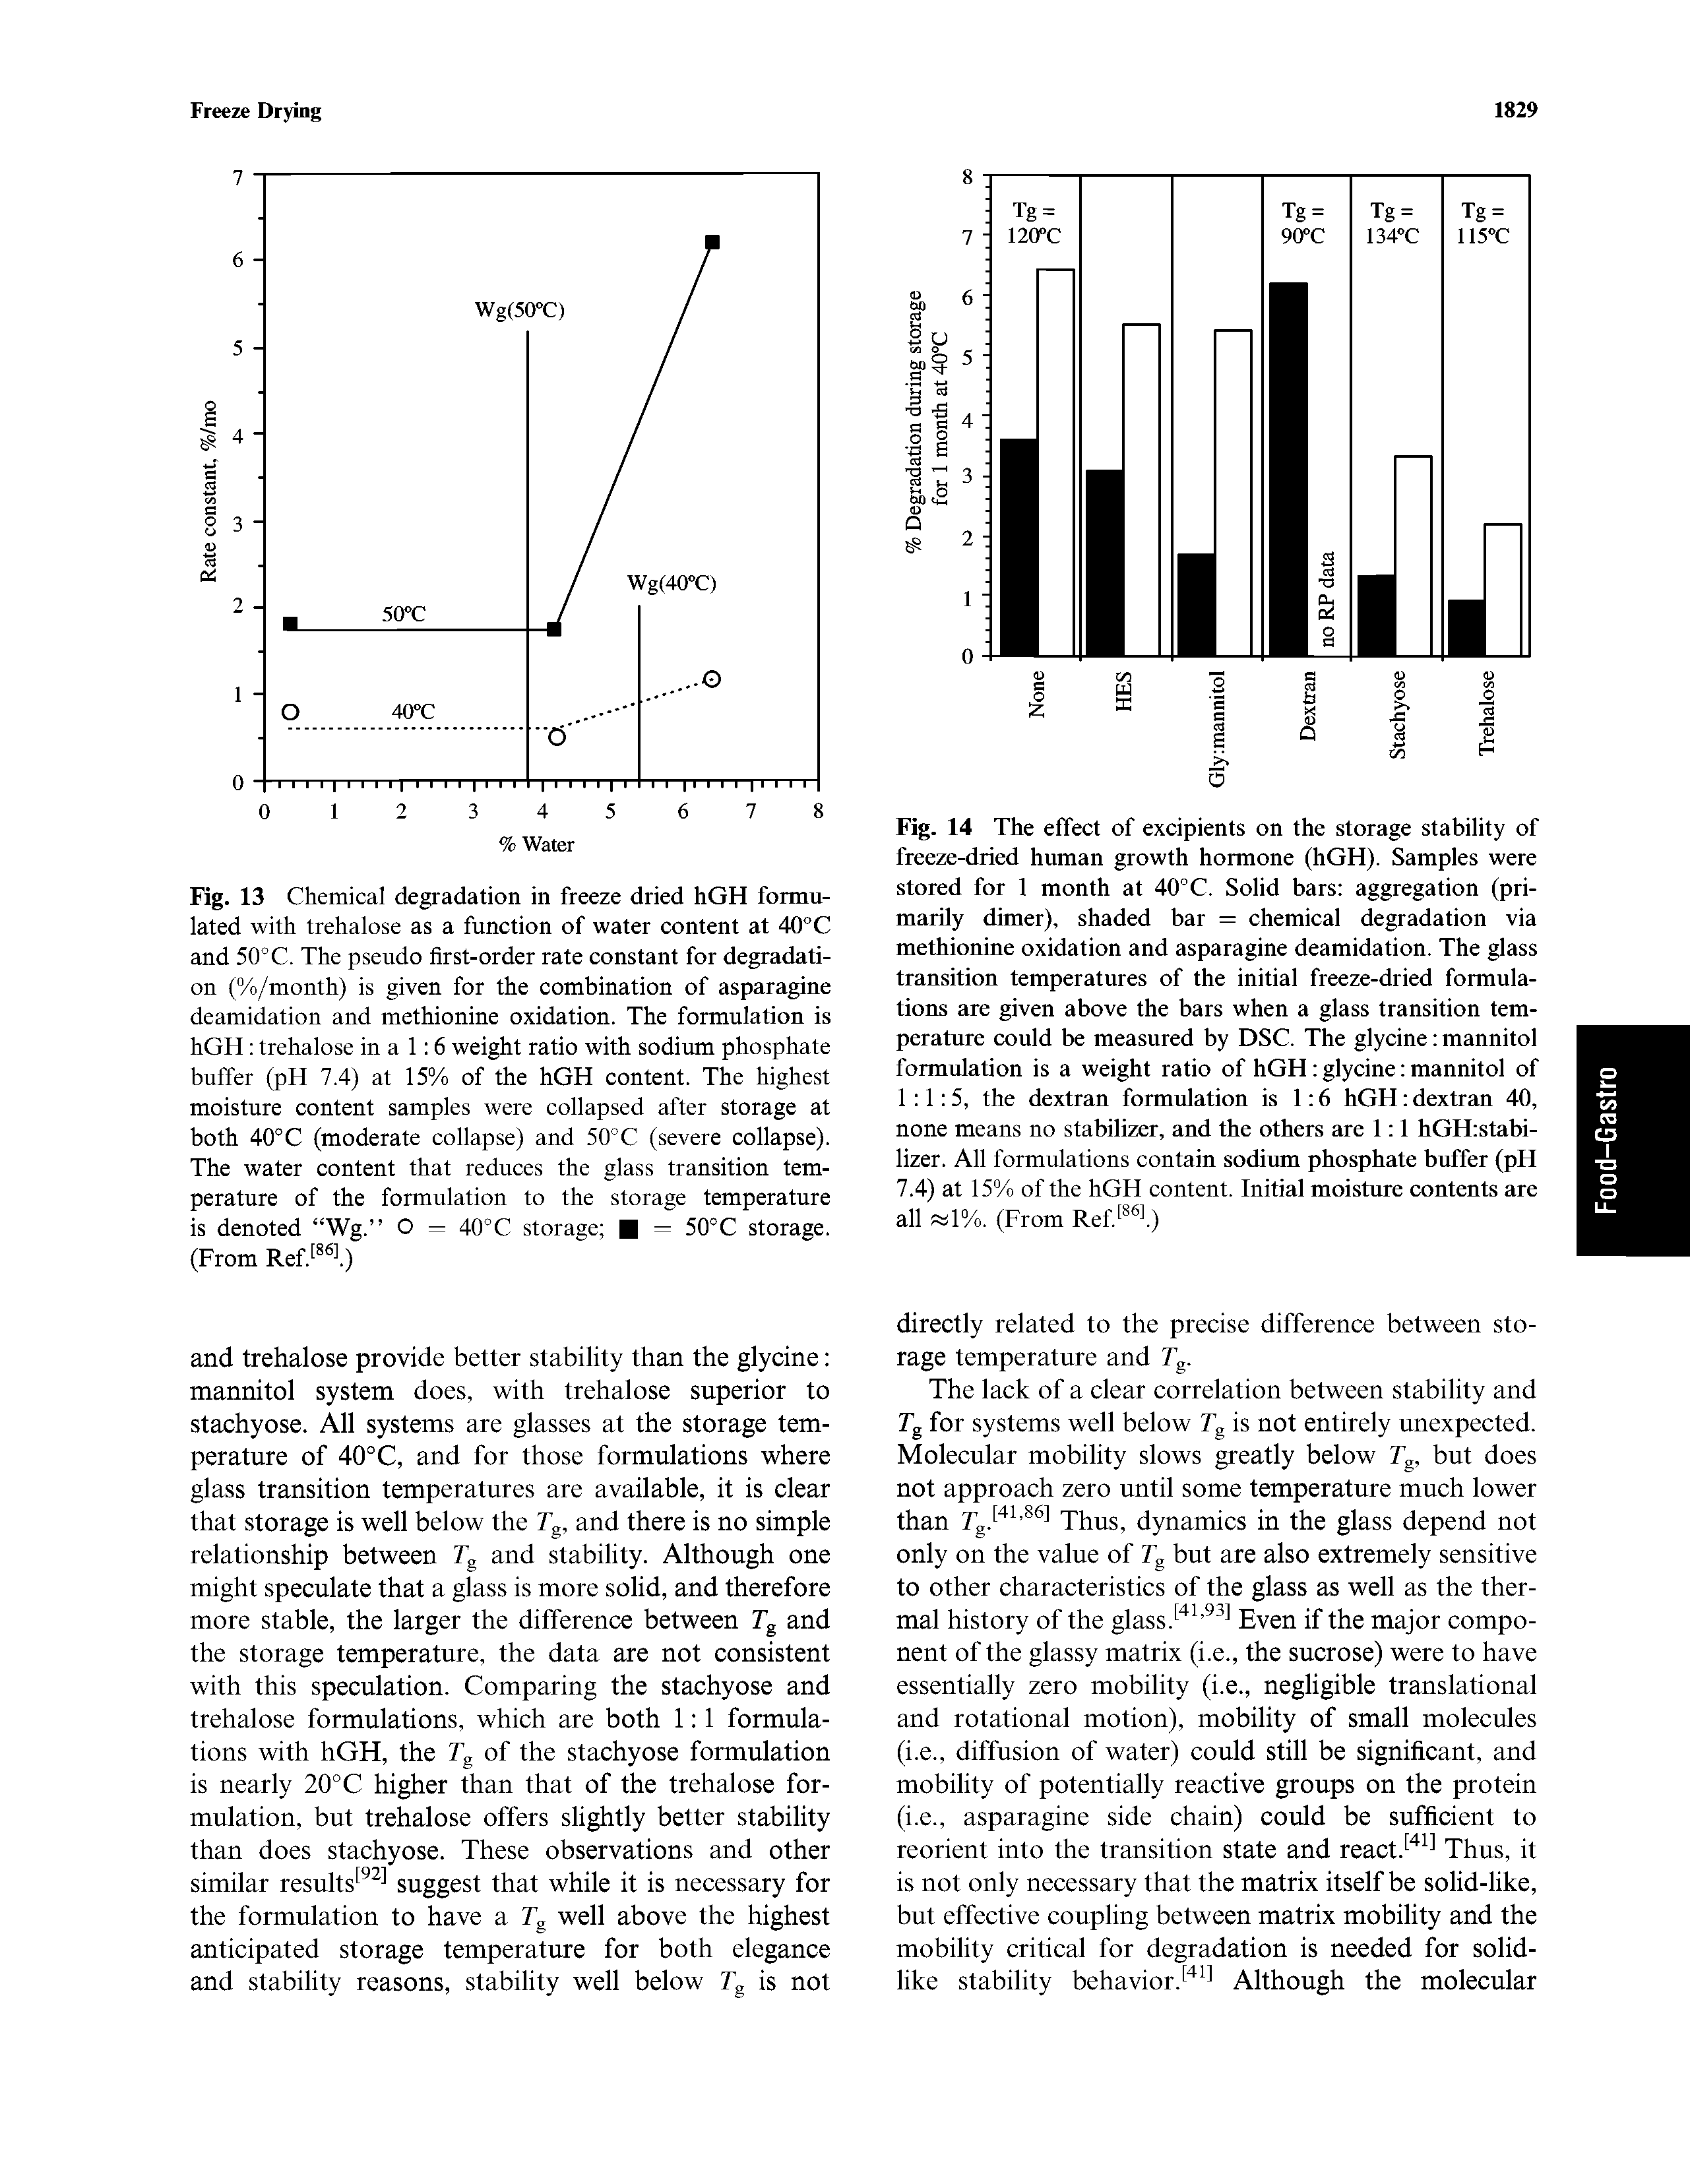 Fig. 13 Chemical degradation in freeze dried hGH formulated with trehalose as a function of water content at 40 C and 50°C. The pseudo first-order rate constant for degradation (%/month) is given for the combination of asparagine deamidation and methionine oxidation. The formulation is hGH trehalose in a 1 6 weight ratio with sodium phosphate buffer (pH 7.4) at 15% of the hGH content. The highest moisture content samples were collapsed after storage at both 40°C (moderate collapse) and 50°C (severe collapse). The water content that reduces the glass transition temperature of the formulation to the storage temperature is denoted Wg. O = 40°C storage = 50°C storage. (From Ref. l)...